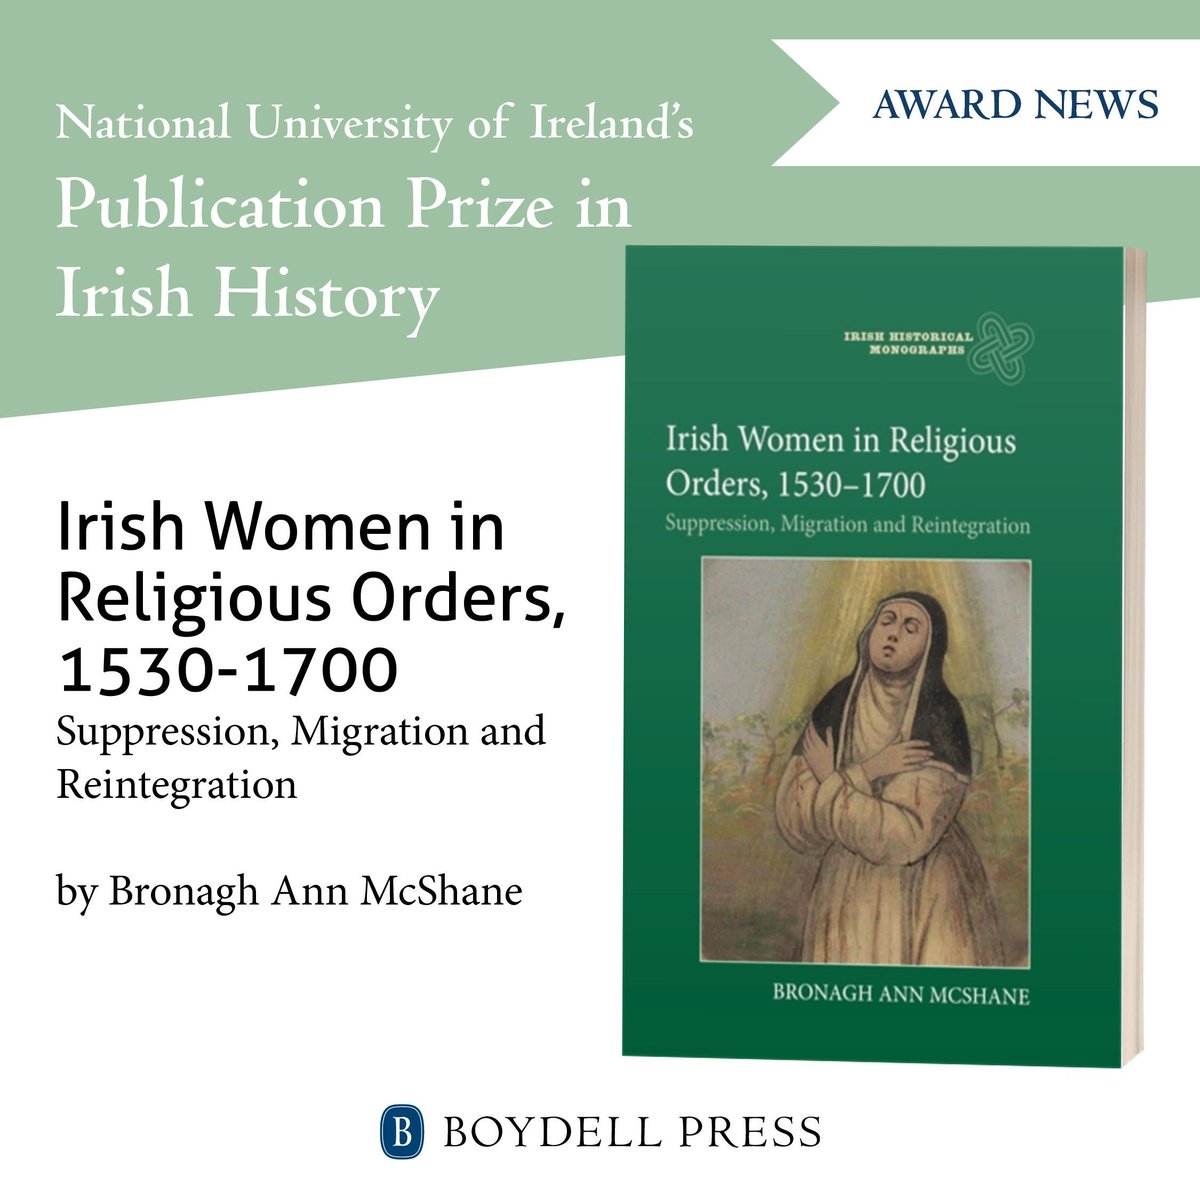 Congratulations to Bronagh Ann McShane! Her book 'Irish Women in Religious Orders, 1530-1700' is joint winner of National University of Ireland's Publication Prize in Irish History! Save 35% on Bronagh's book with code BB135: boybrew.co/49xK8Nn @BA_McShane @NUIMerrionSq